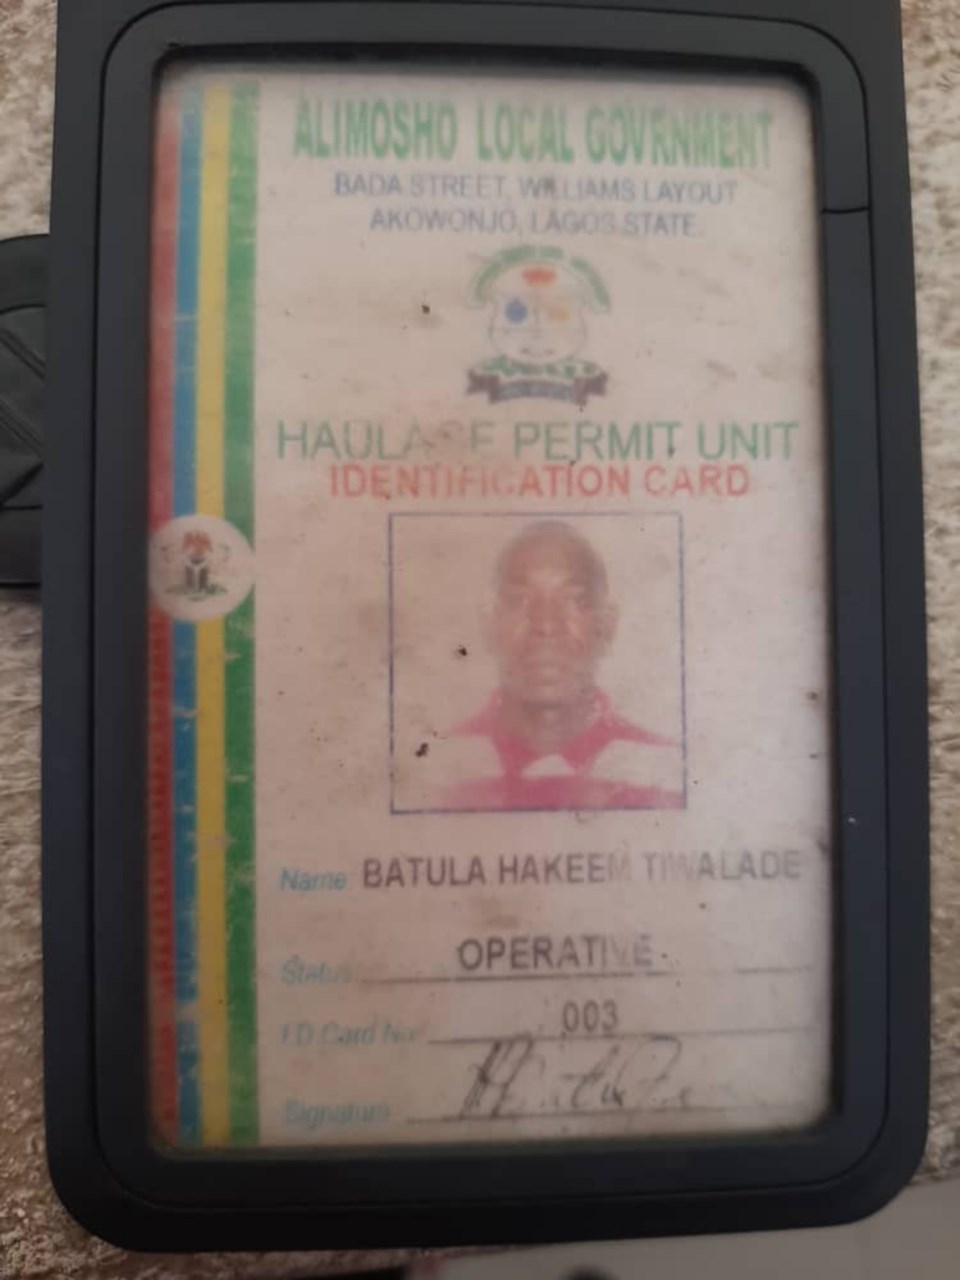 Recovered identity card